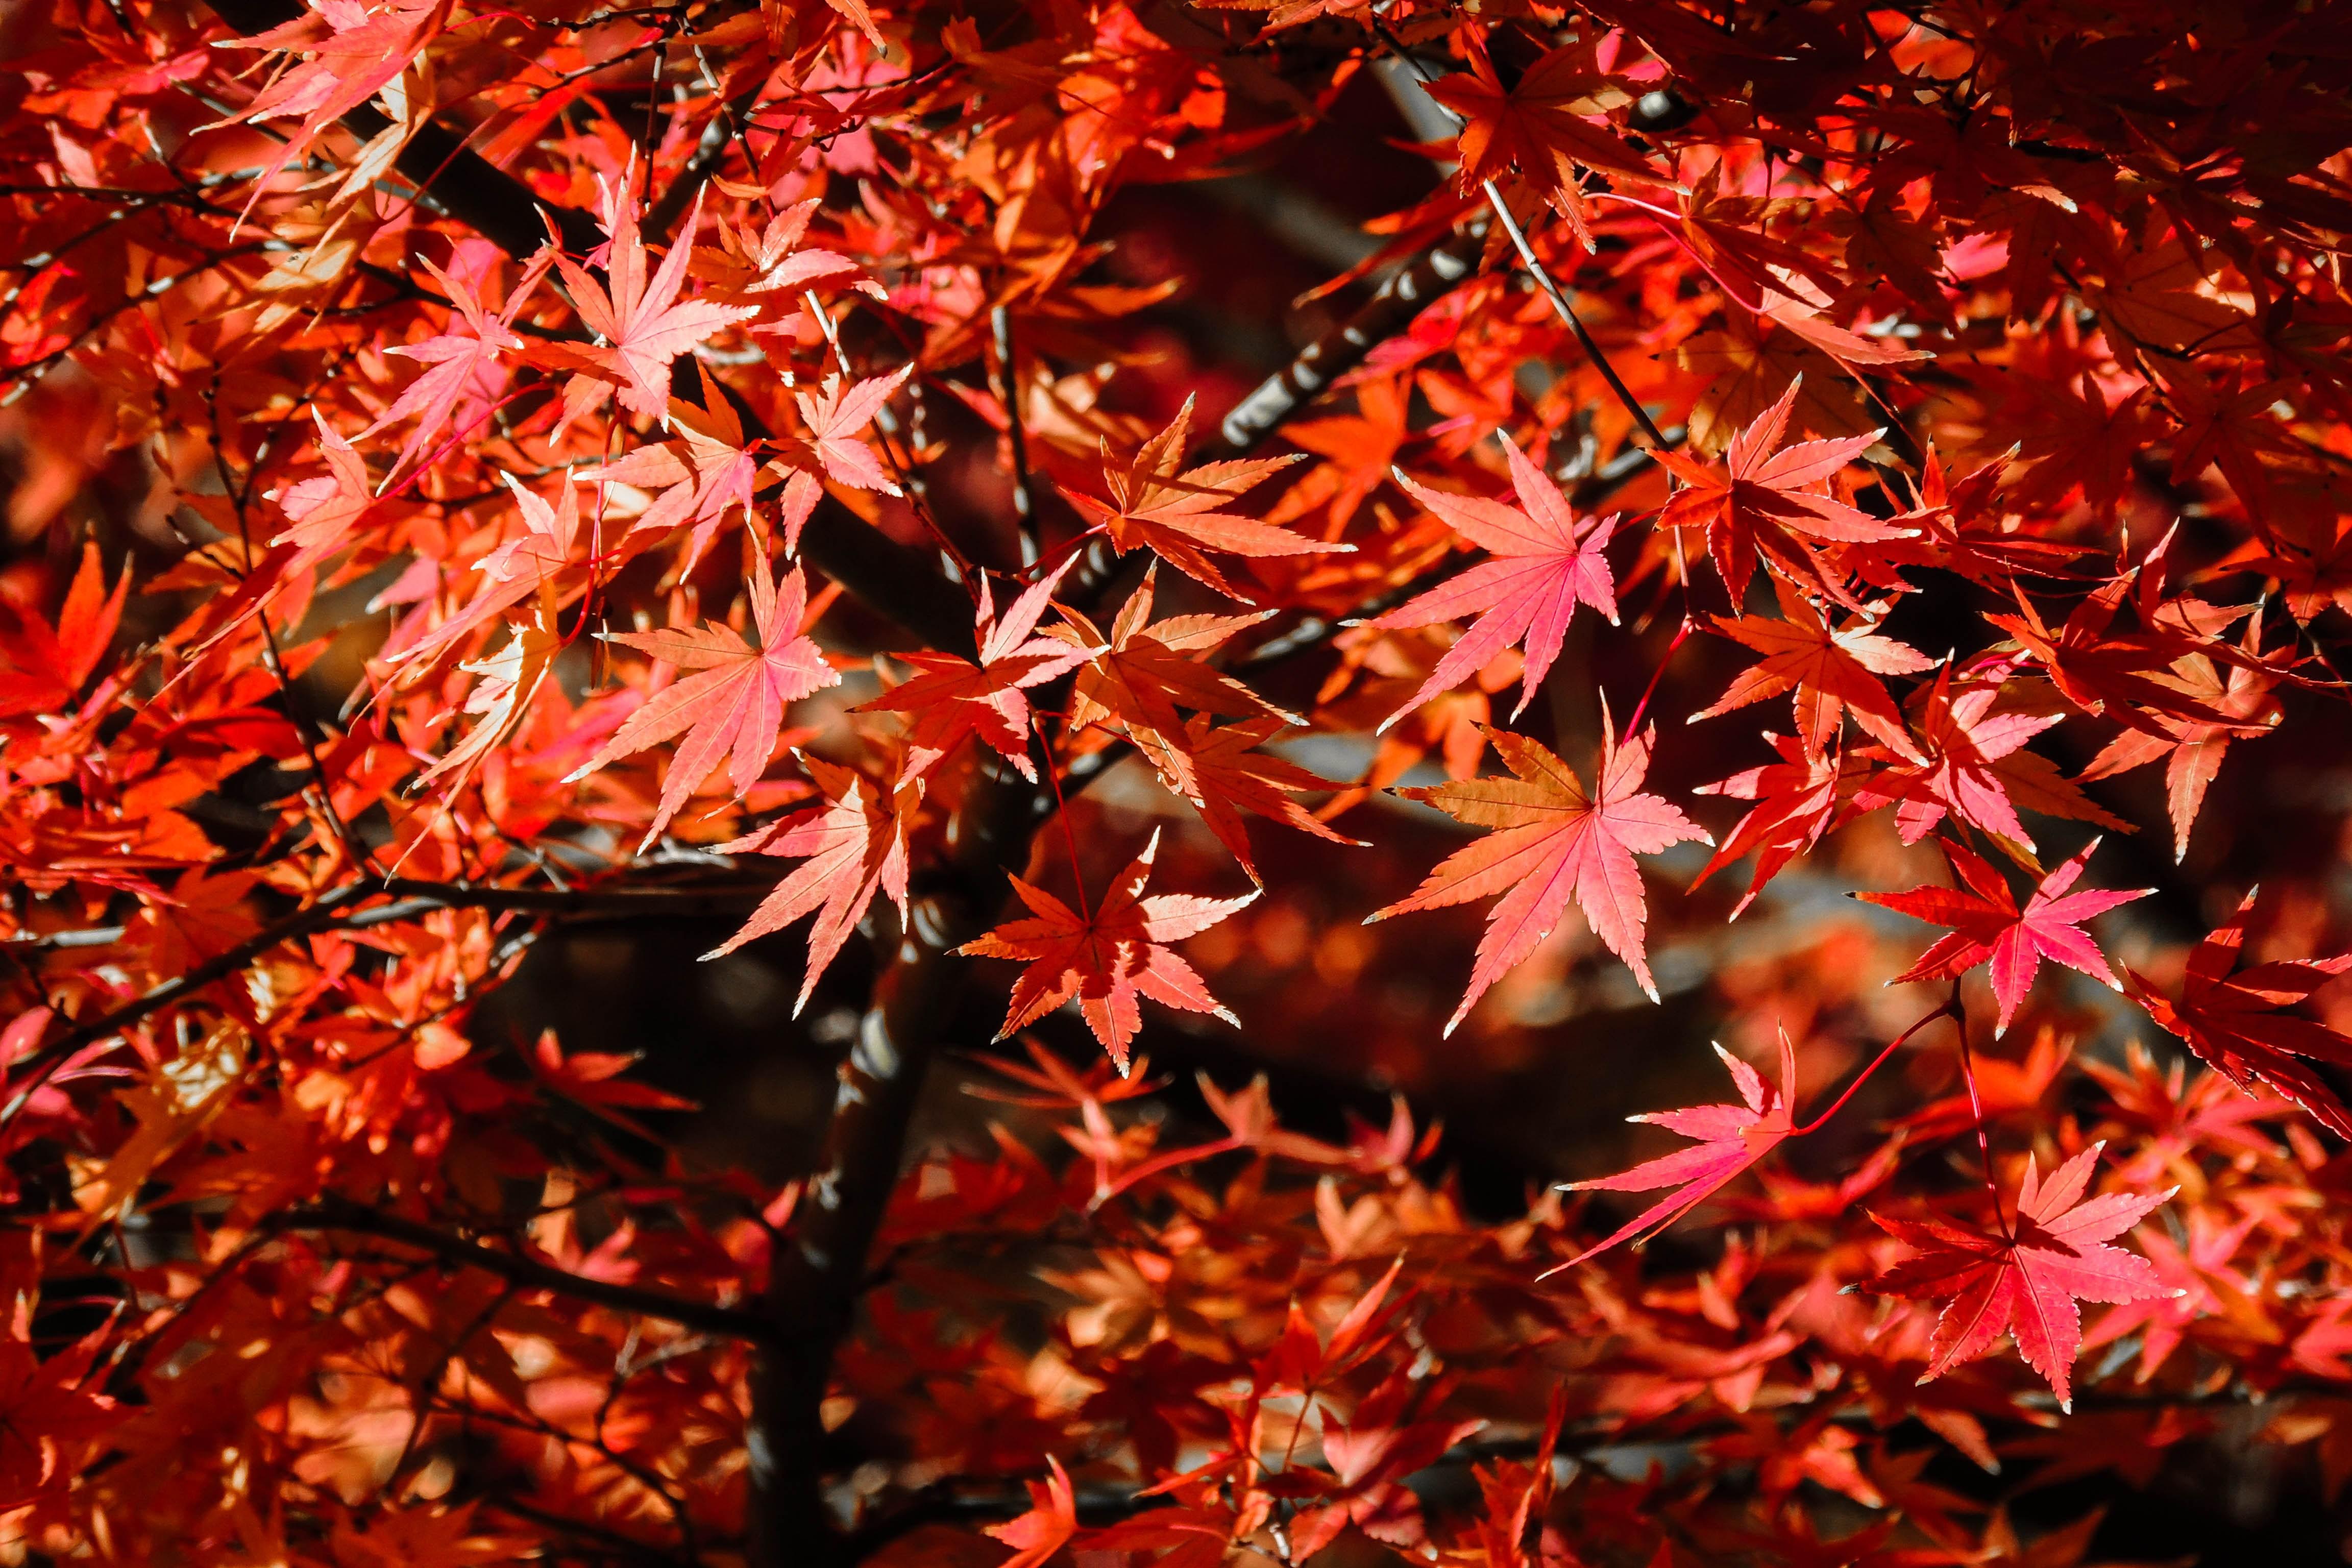 Refreshing red-orange leaves, on dark brown branches of a tree. 